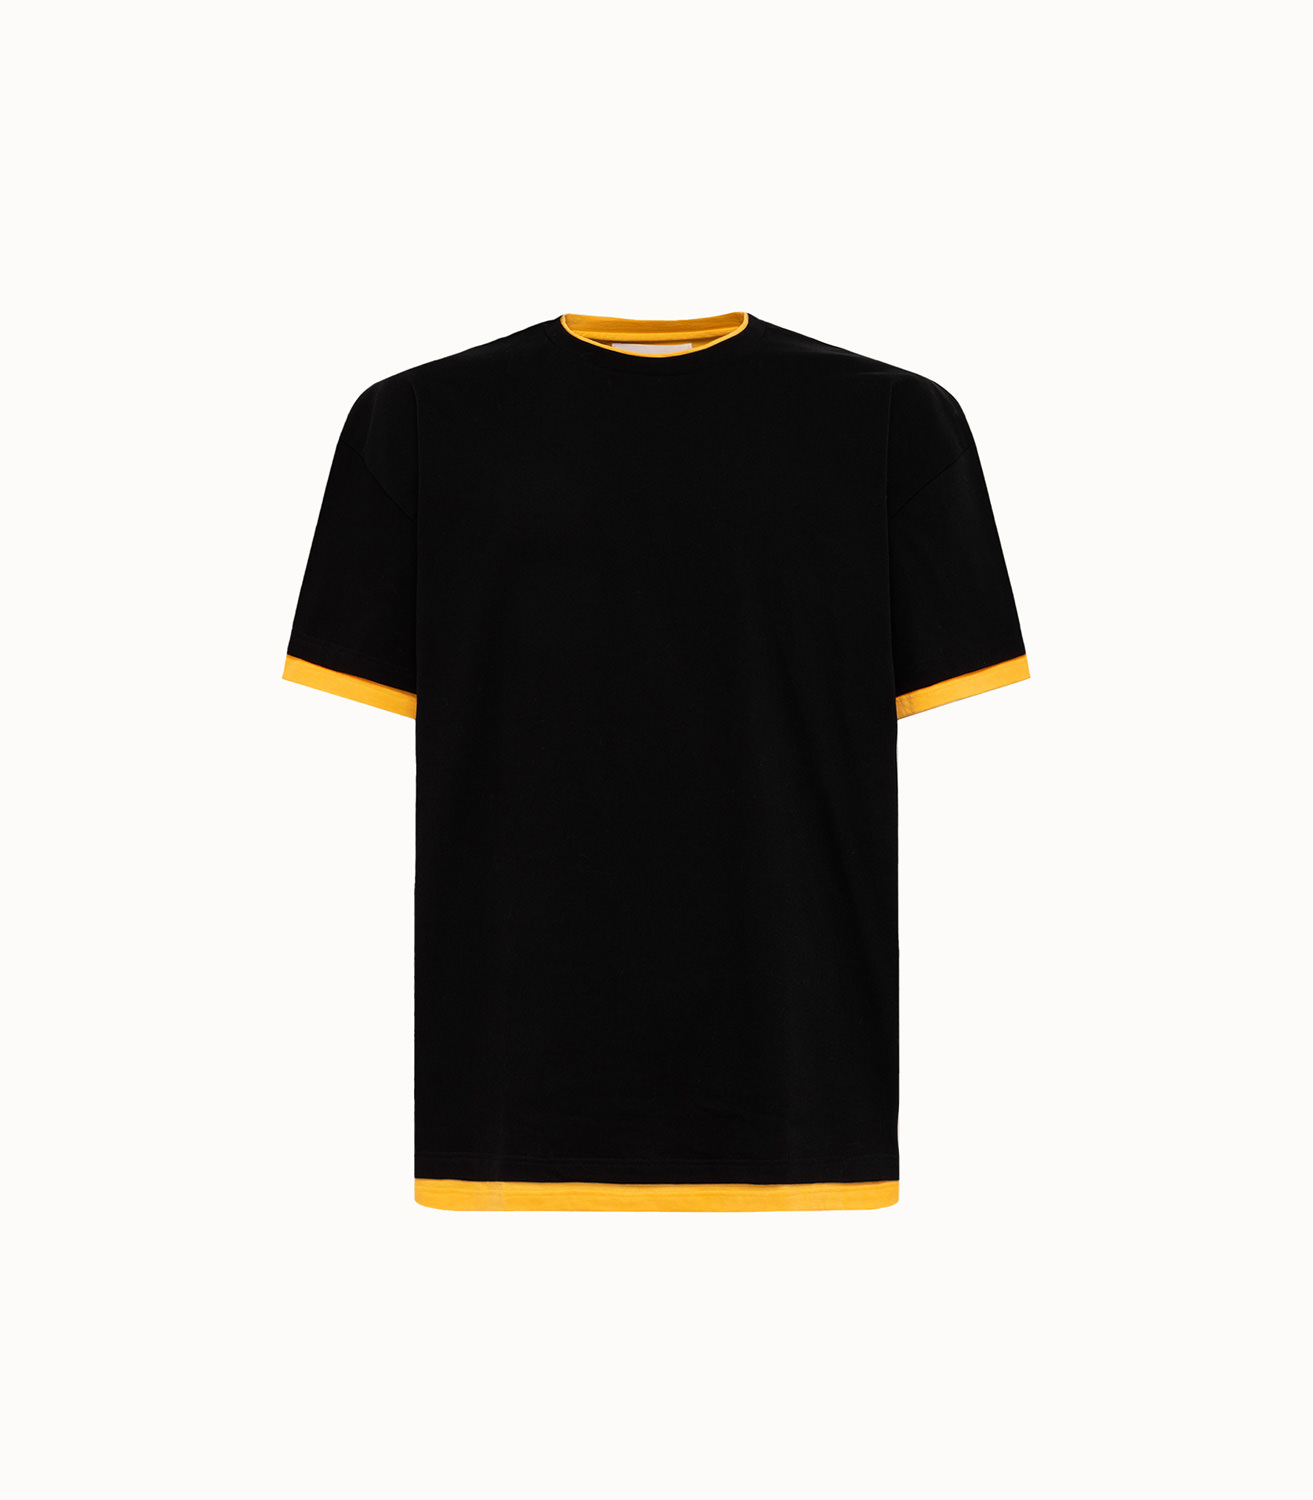 Solid Color Crew-Neck T-Shirt with Contrasting Print